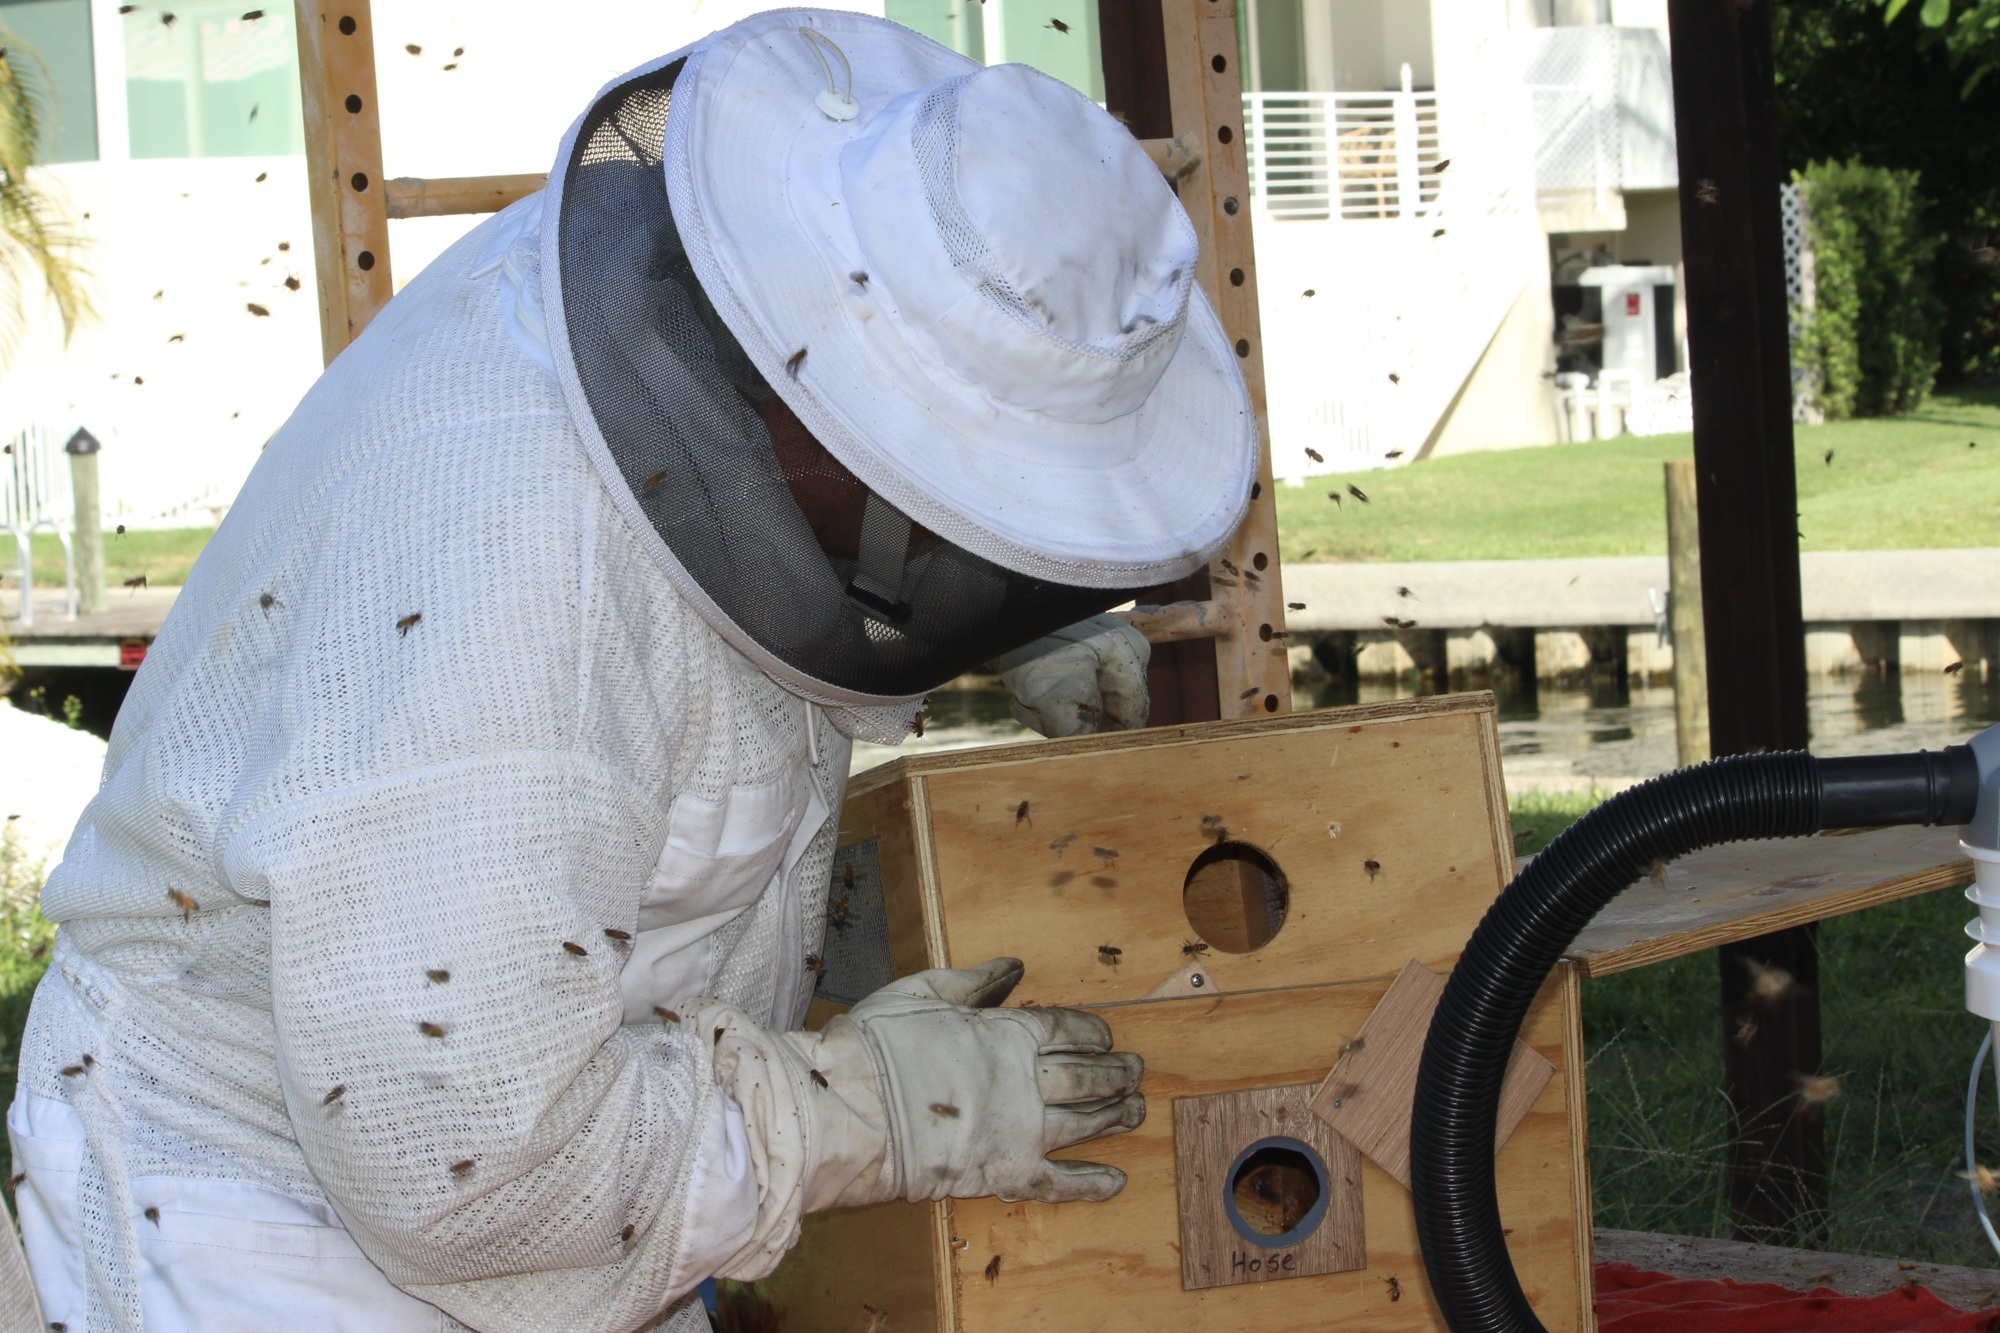 A vacuum hose attaches to the box to collect bees. (Photo by Lesley Dwyer)